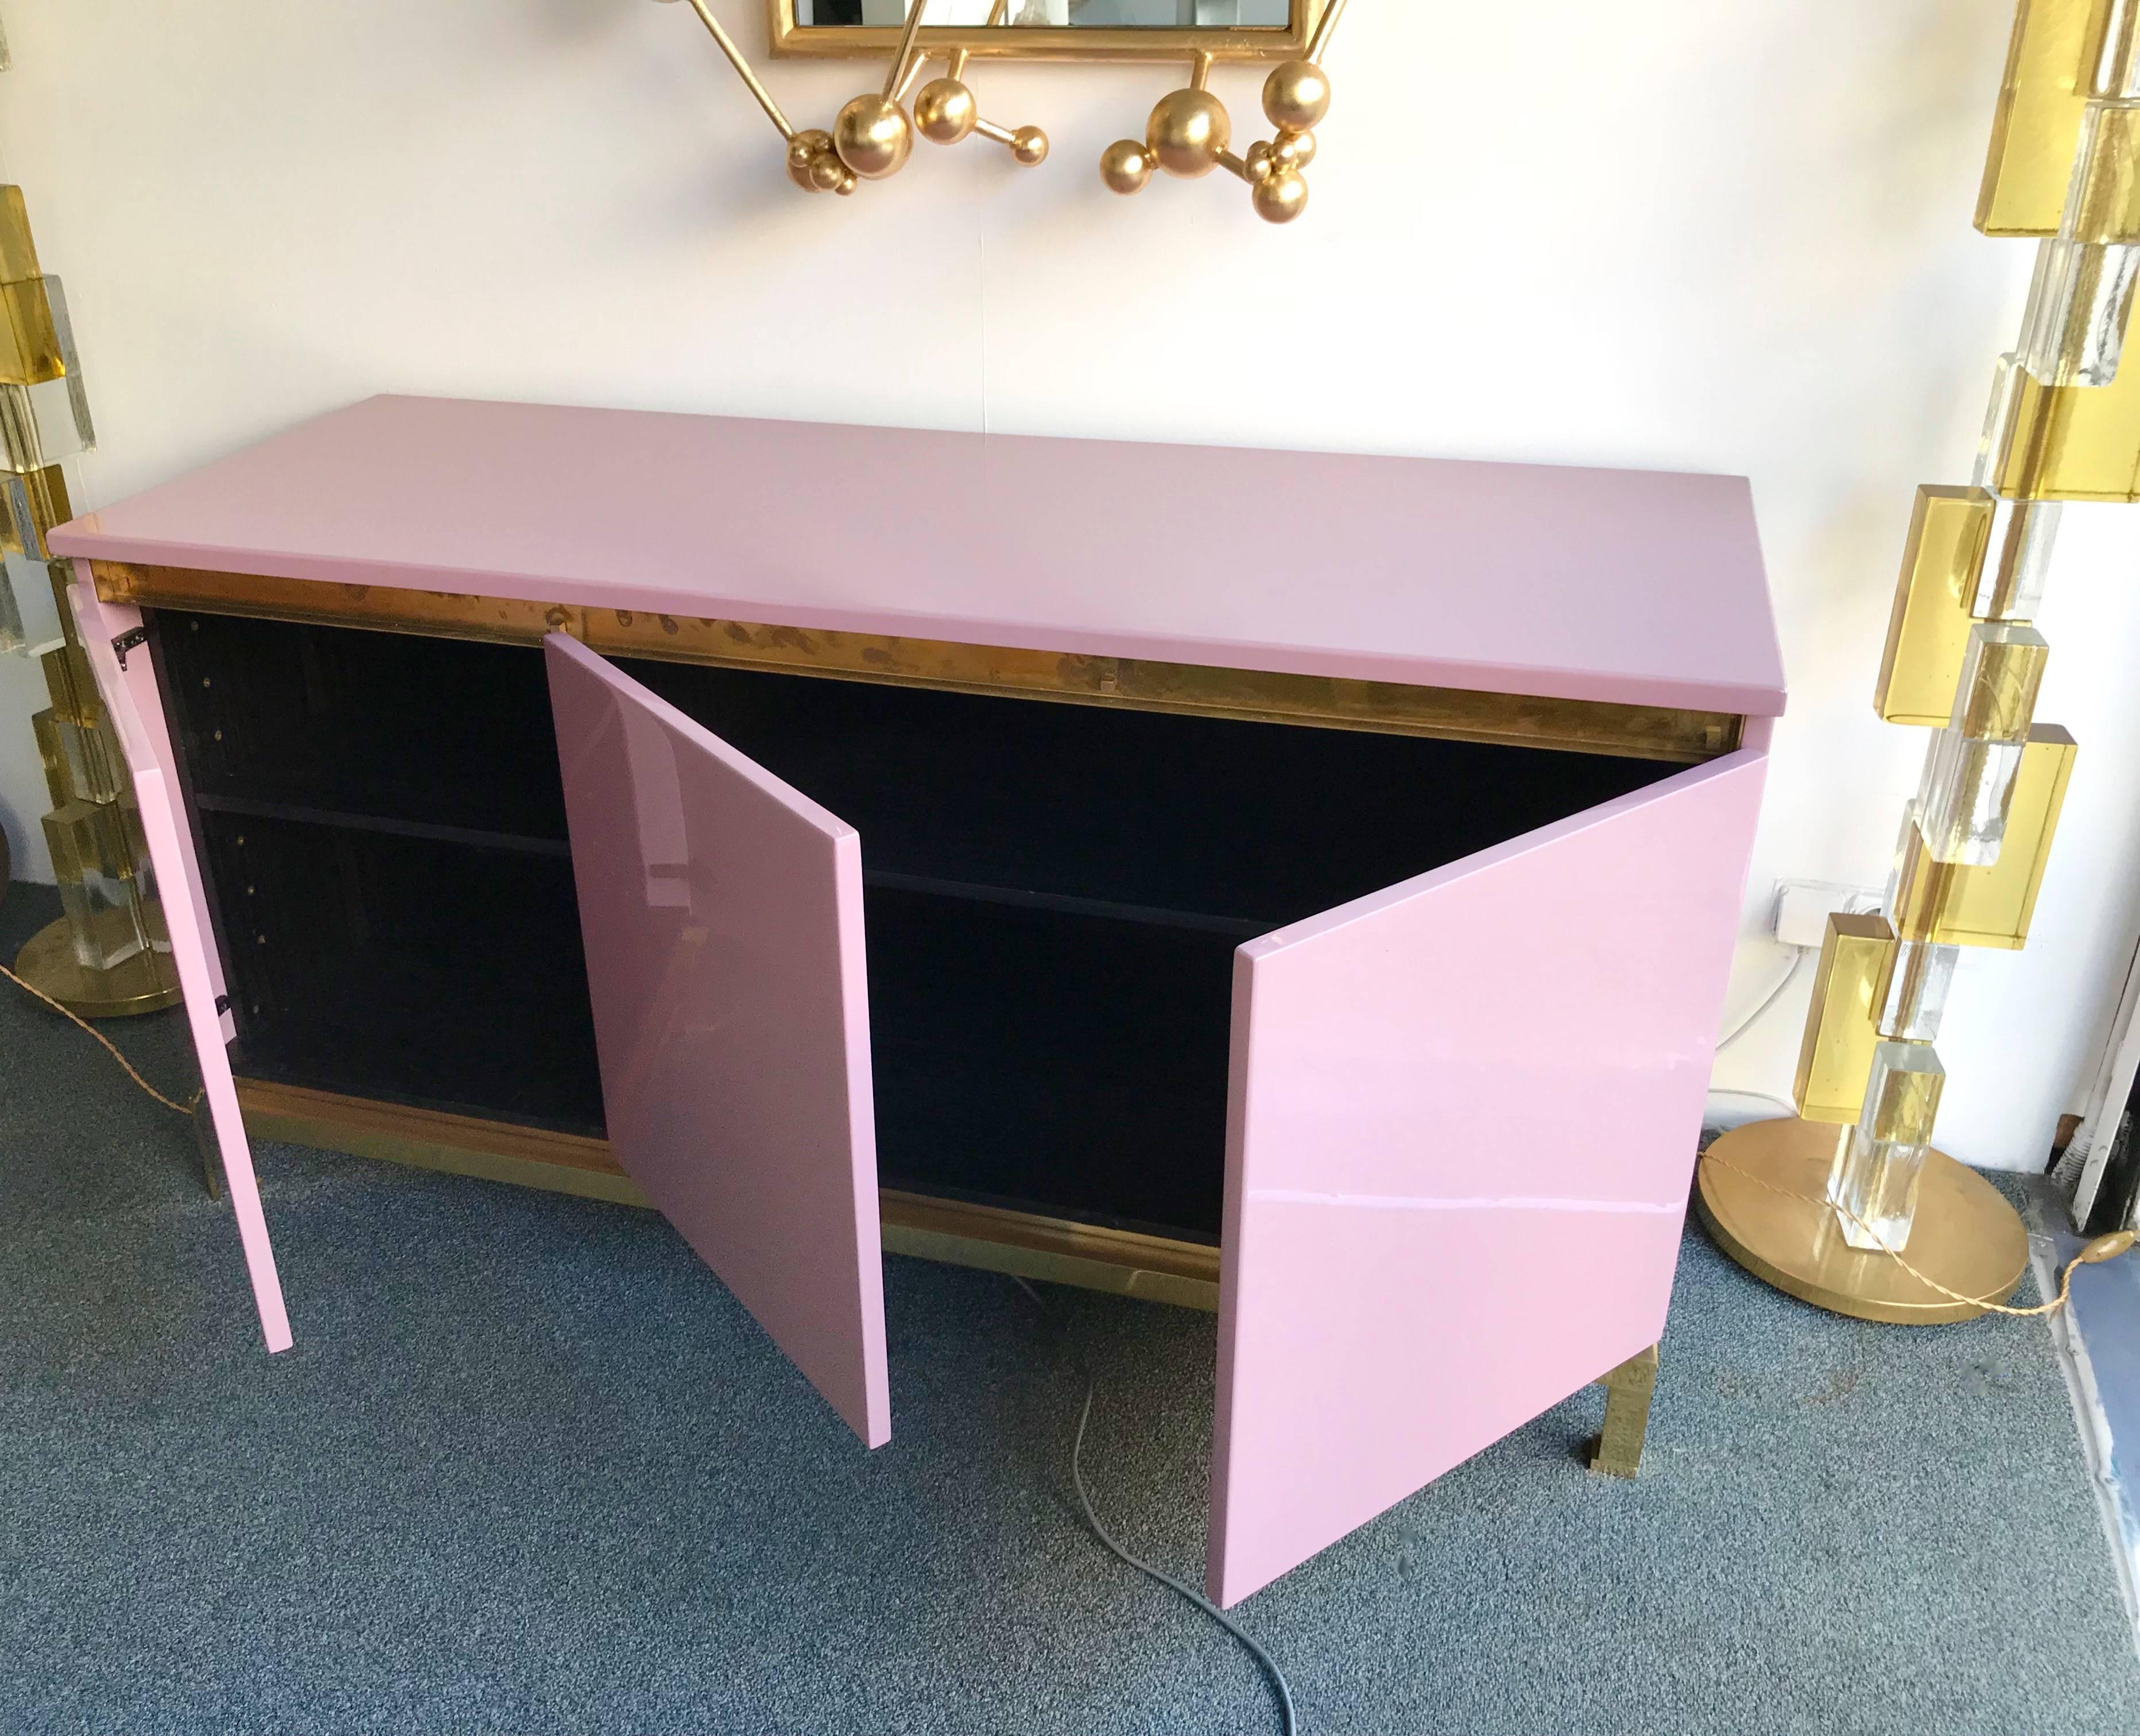 Rare sideboard, buffet or dresser three doors in light purple Parma lacquer, full brass feet, interior in plated dark mahogany wood by the French designer Guy Lefèvre for Maison Jansen, Paris.